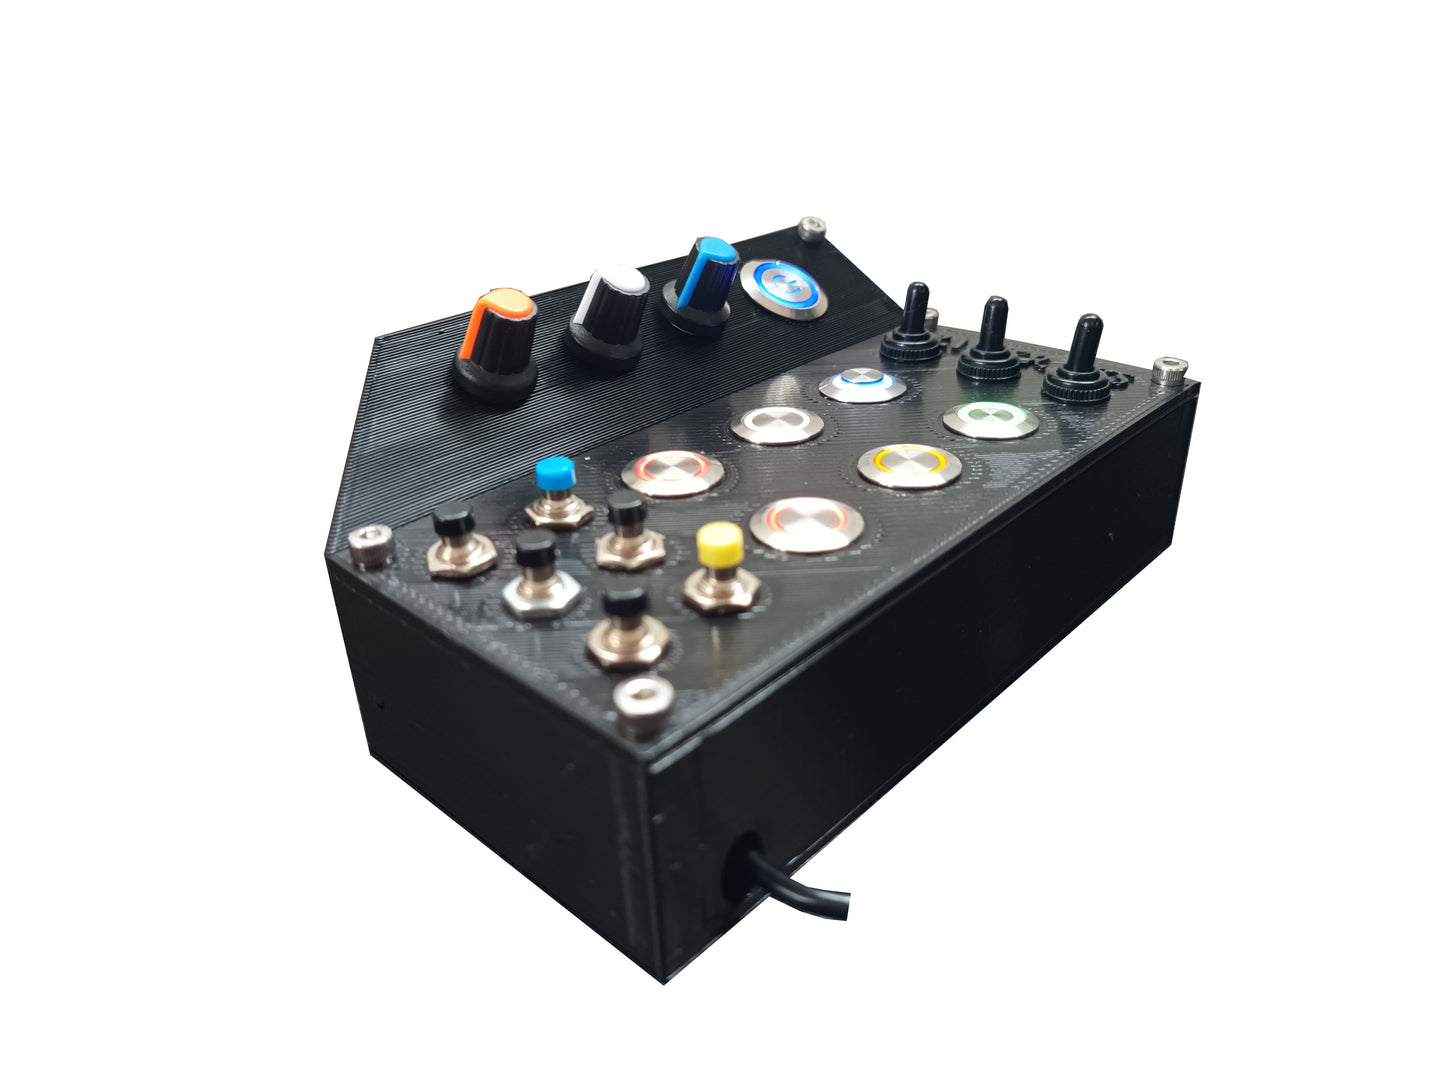 Racecrafts NZ Sim Angled LED Button Box/Controller Console, 12x Push Buttons, 3 Toggle Switches, 3x Potentiometers